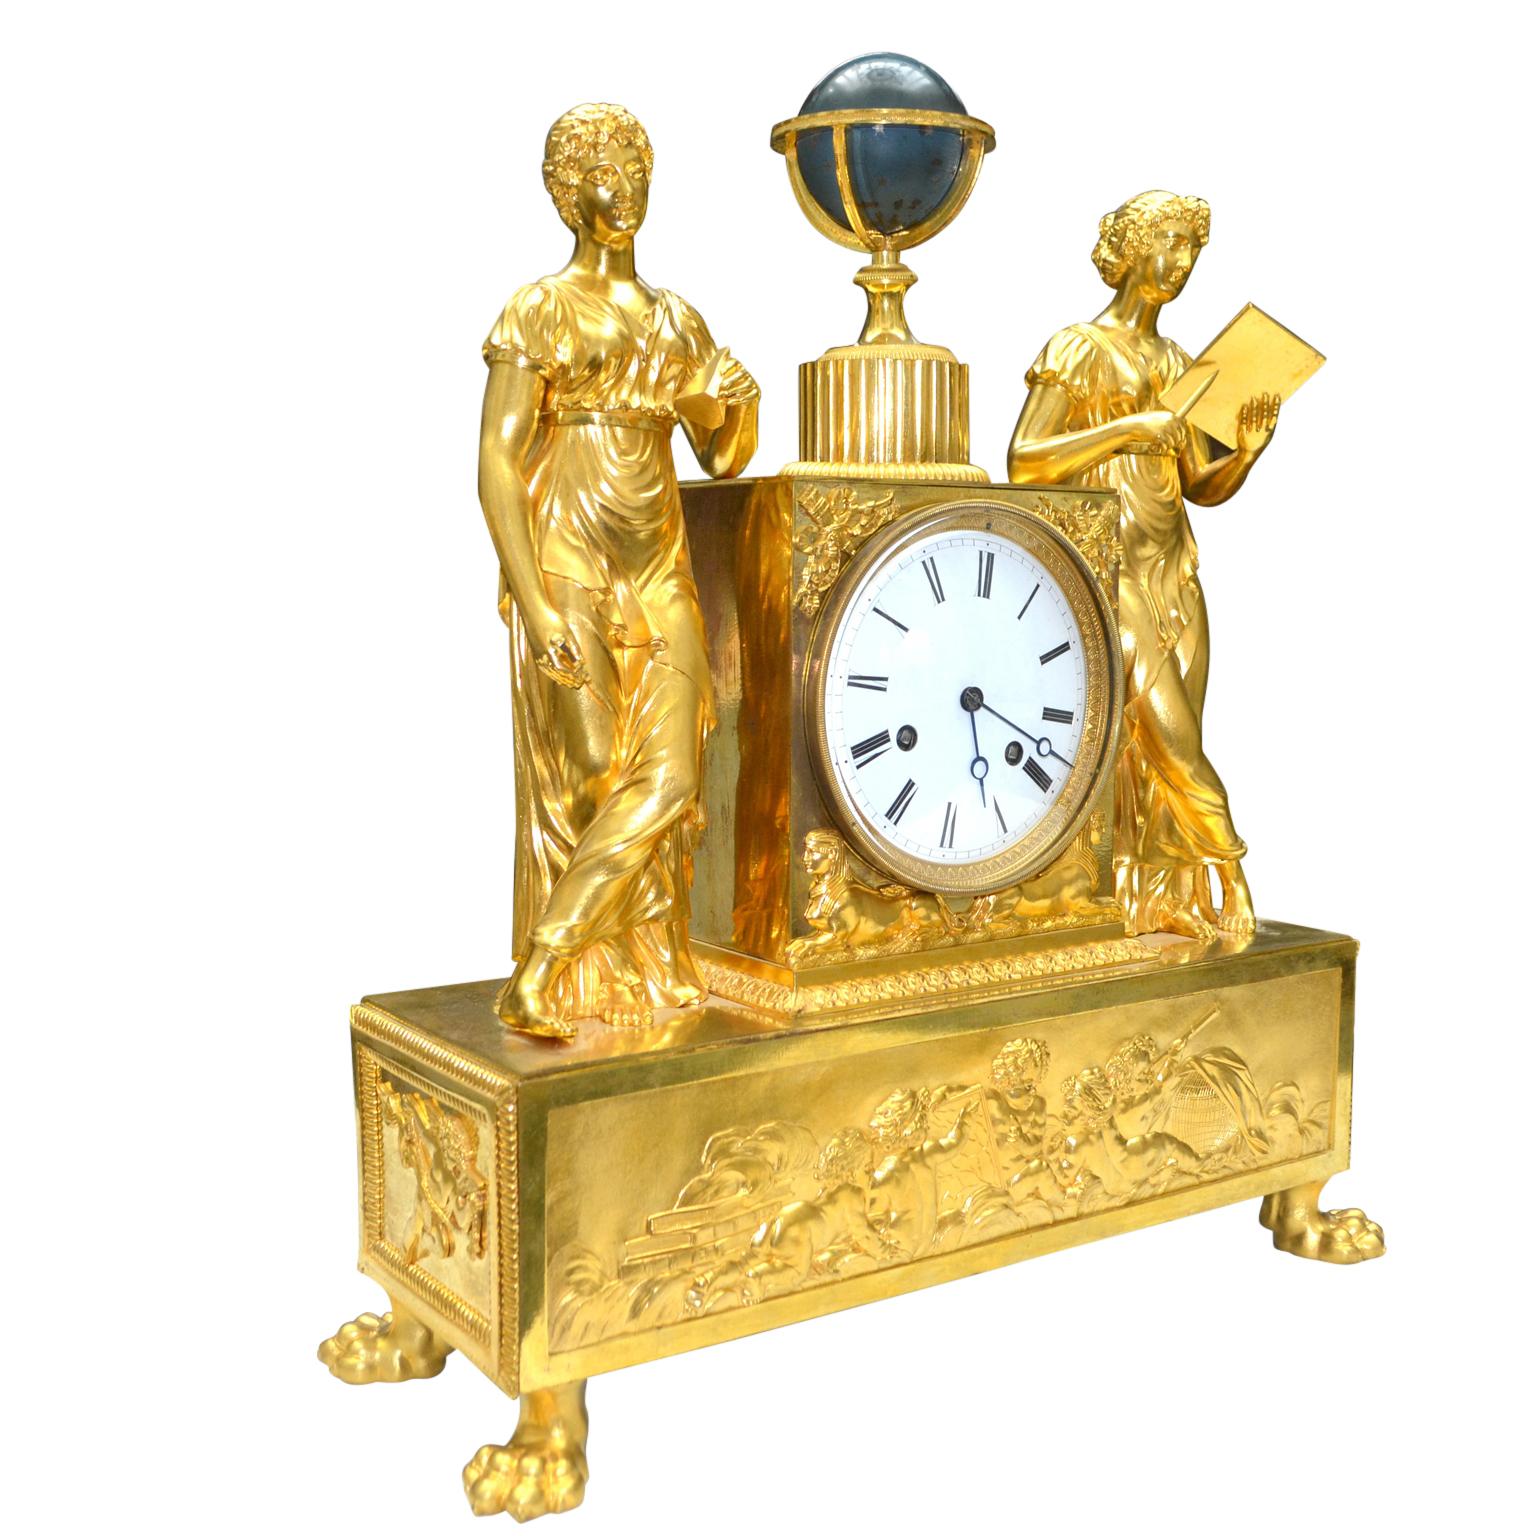  French Empire Gilt Bronze Allegorical Clock Depicting the Astronomical Sciences In Good Condition For Sale In Vancouver, British Columbia